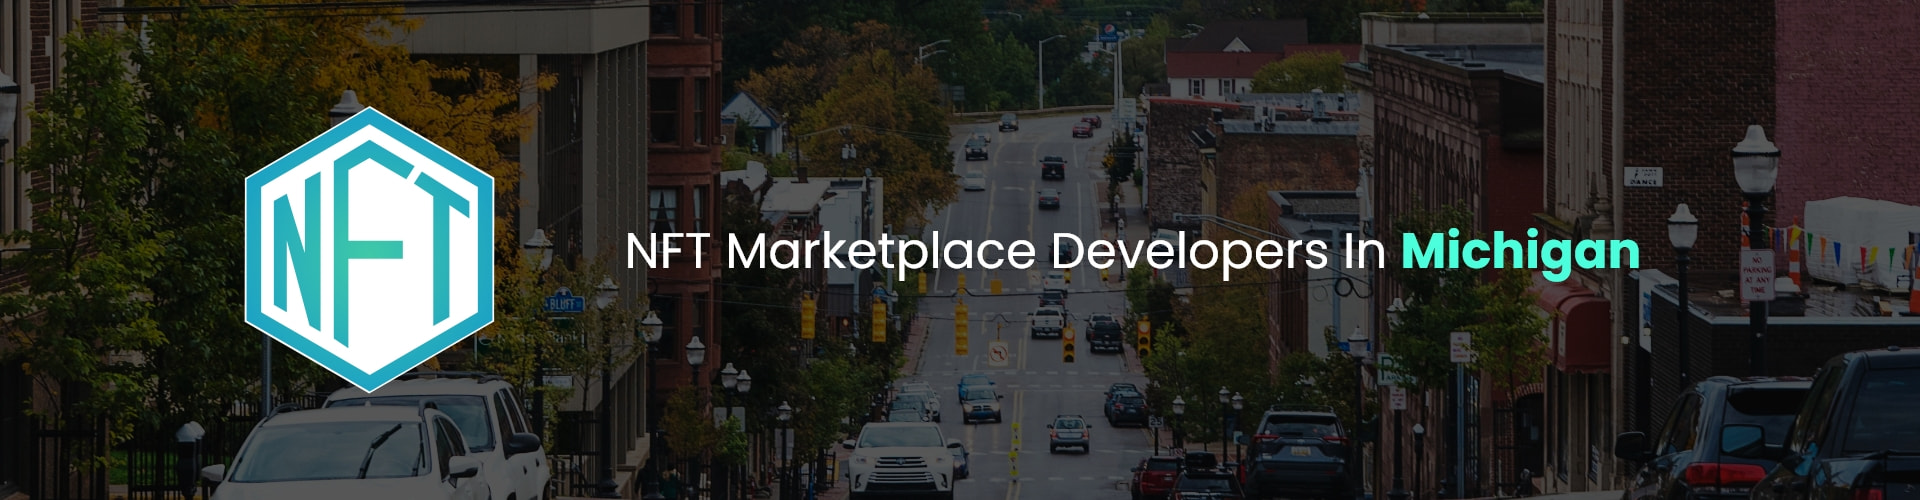 hire nft marketplace developers in michigan